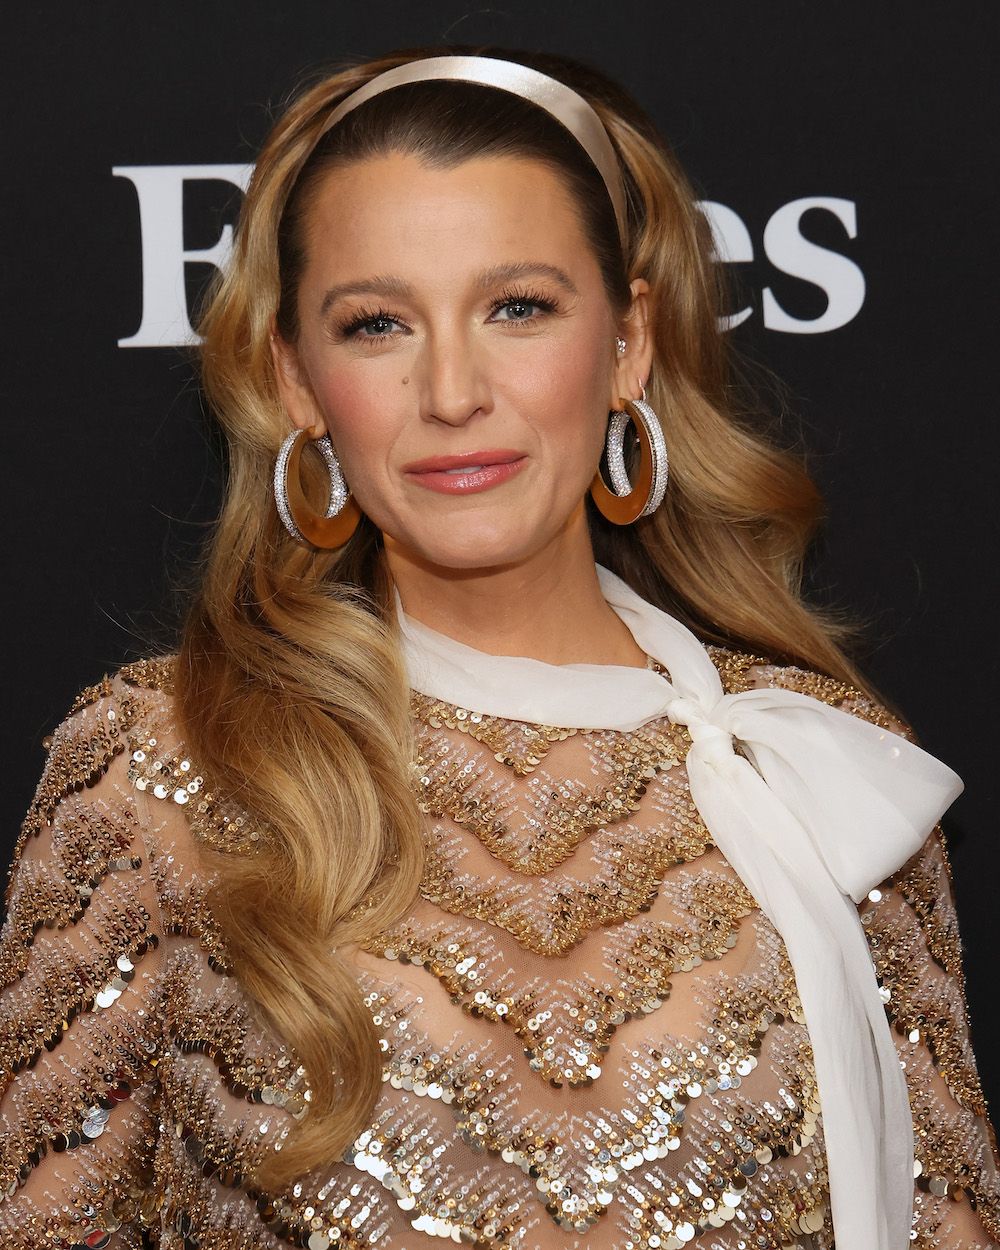 Blake Lively Shares Twinning Bedhead Photo With Her Gorgeous Sister